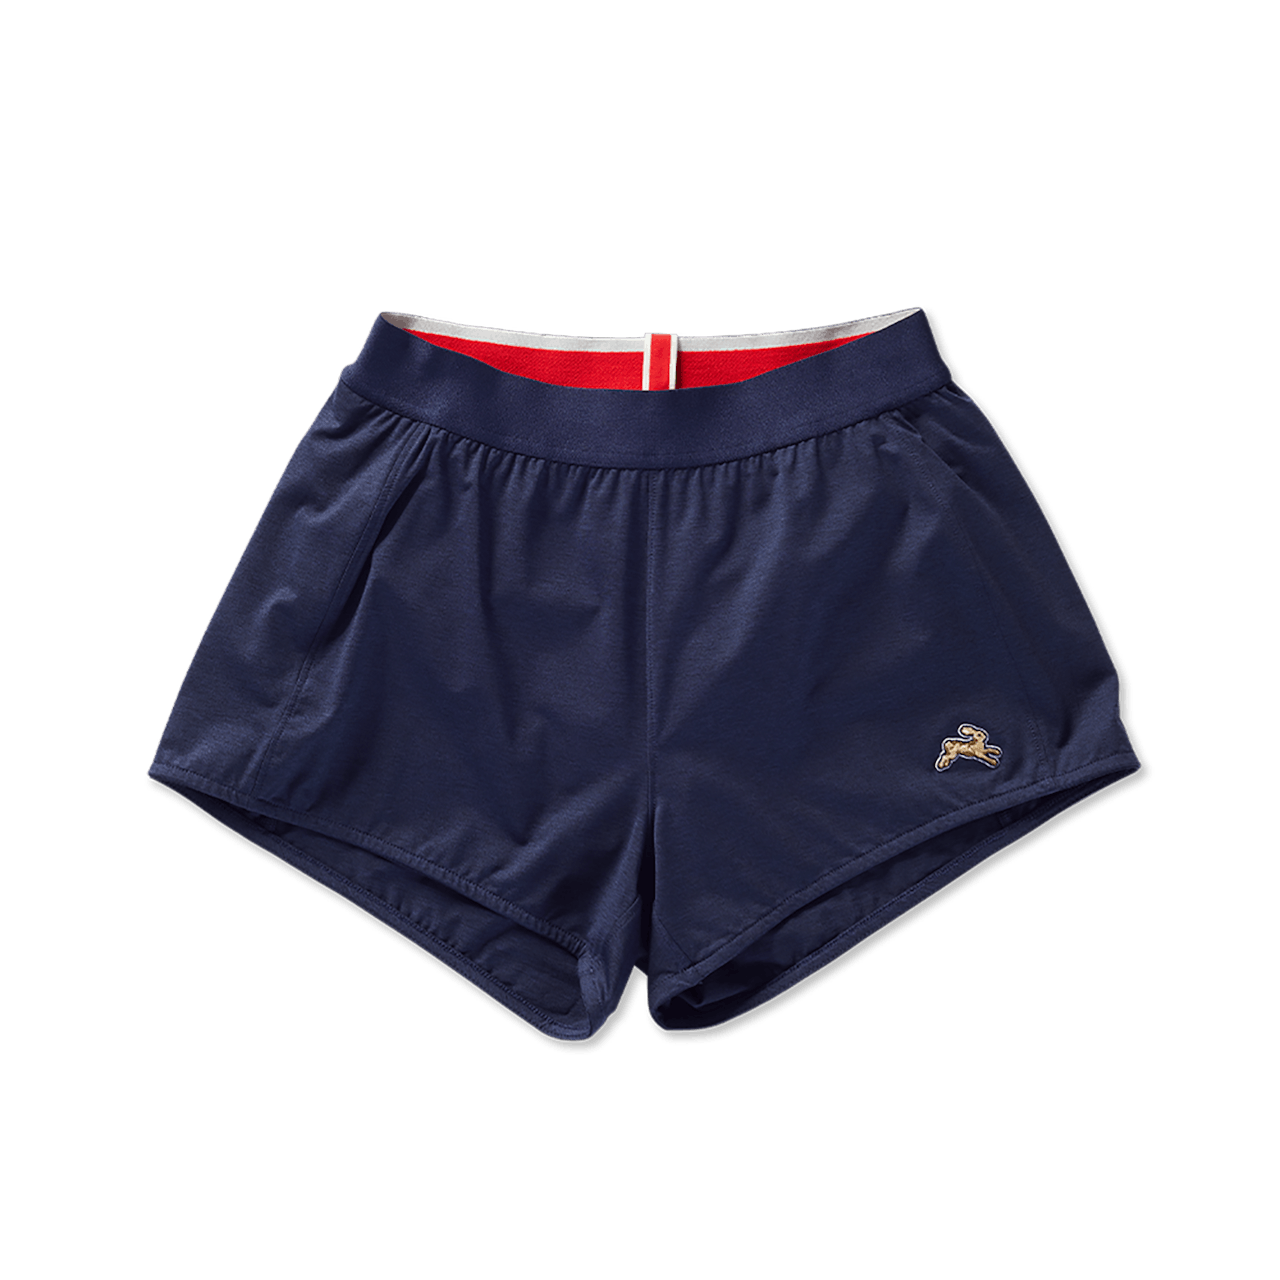 https://tracksmith-media.imgix.net/Spring20-Womens-Session-3Inch-Shorts-Navy.png?auto=format,compress&crop=faces&dpr=2&fit=crop&h=640&w=640